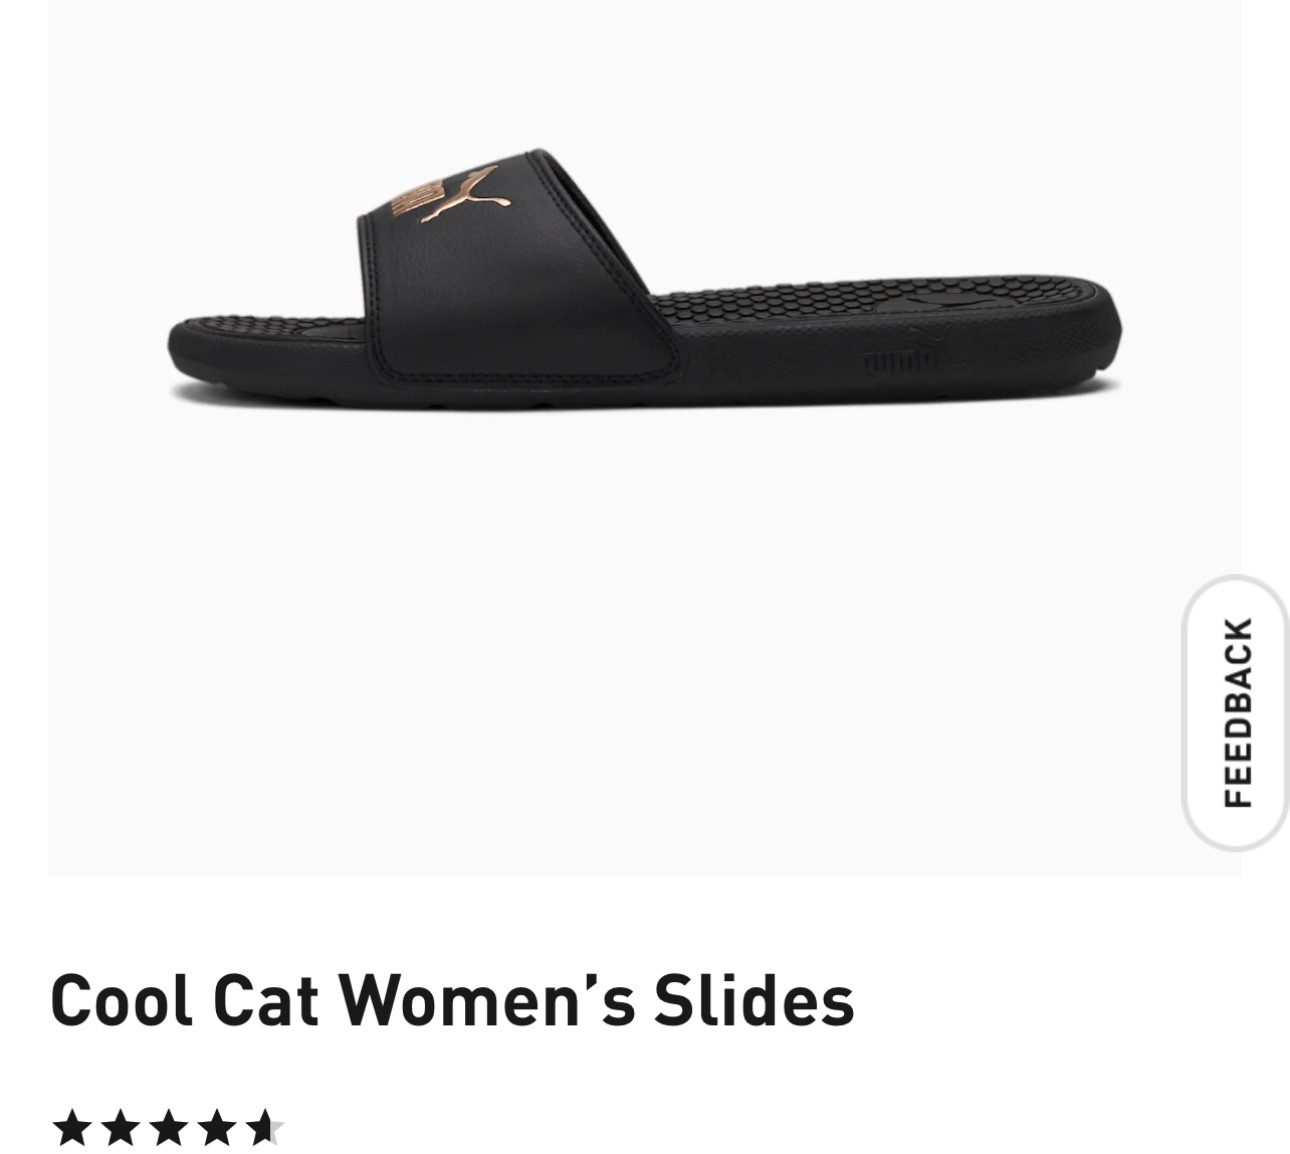 Search Result: Cool cat wome slide